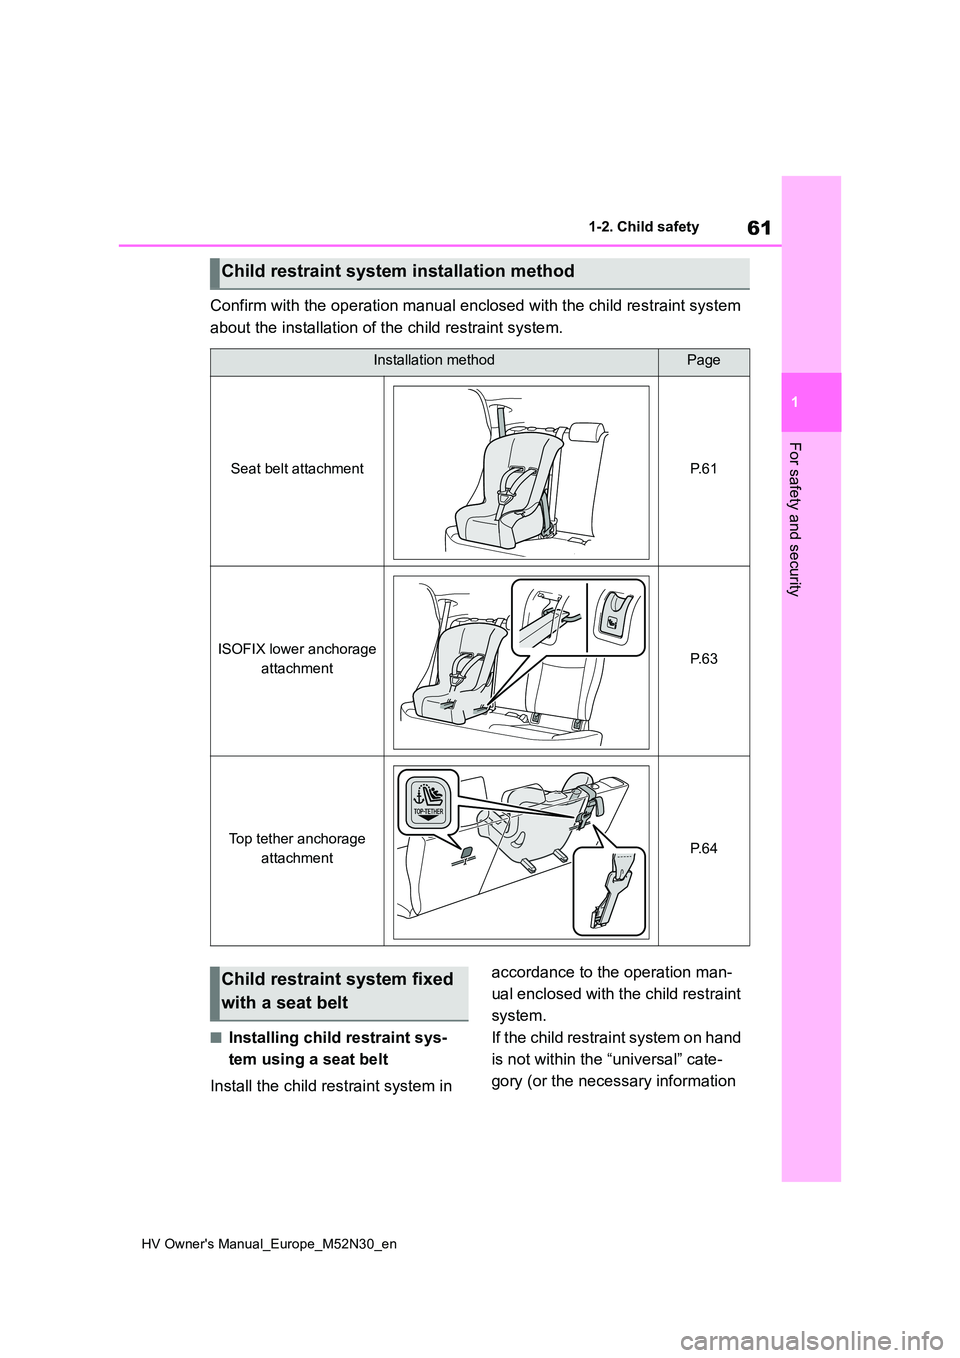 TOYOTA YARIS 2022  Owners Manual 61
1
HV Owner's Manual_Europe_M52N30_en
1-2. Child safety
For safety and security
Confirm with the operation manual enclosed with the child restraint system  
about the installation of the child r